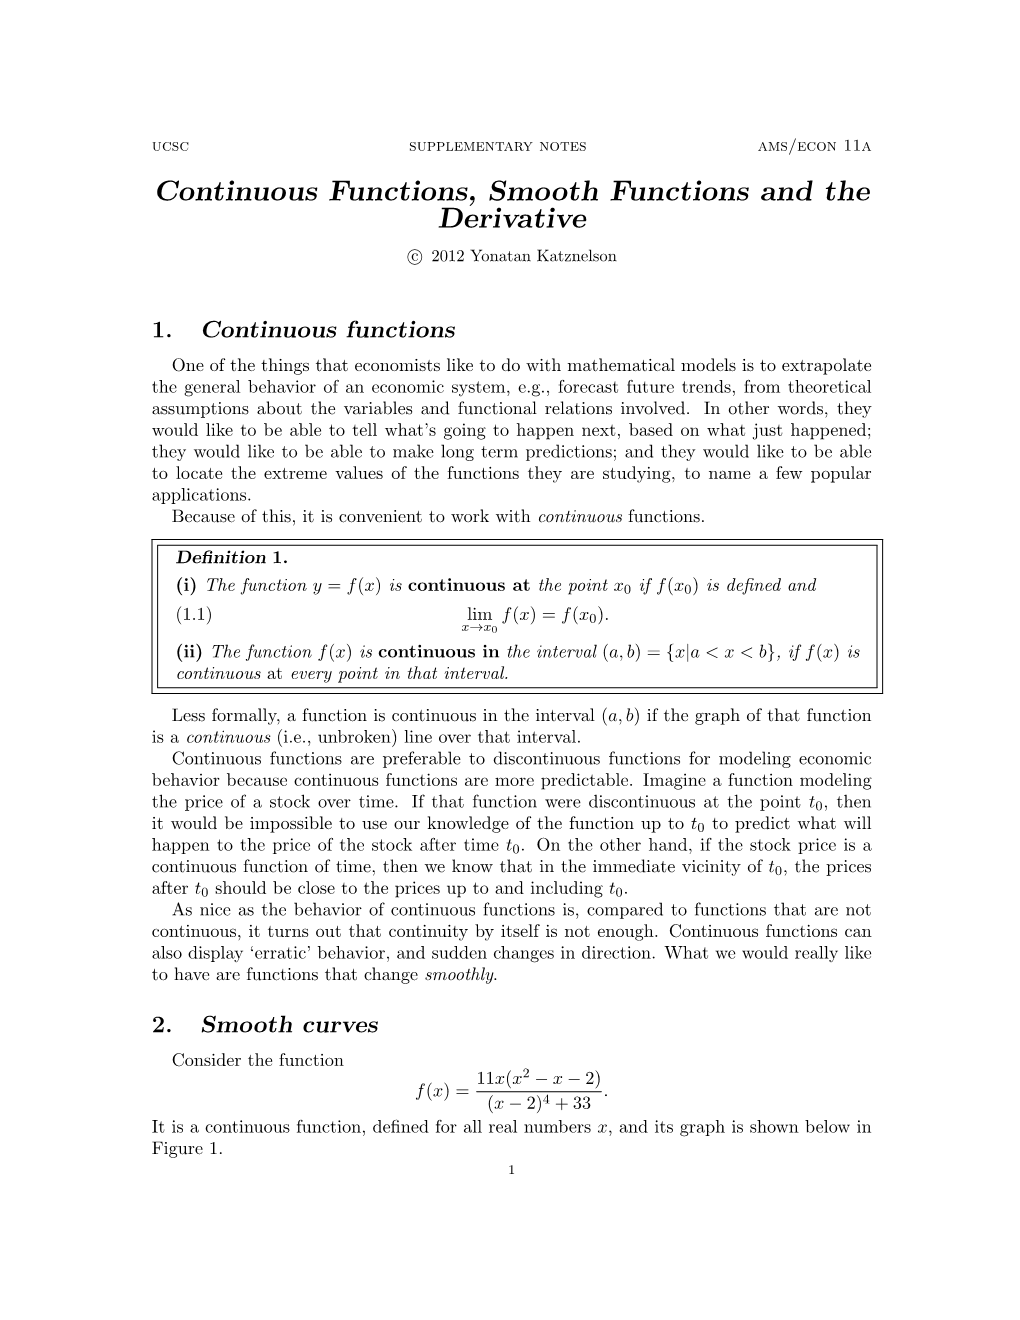 Continuous Functions, Smooth Functions and the Derivative C 2012 Yonatan Katznelson